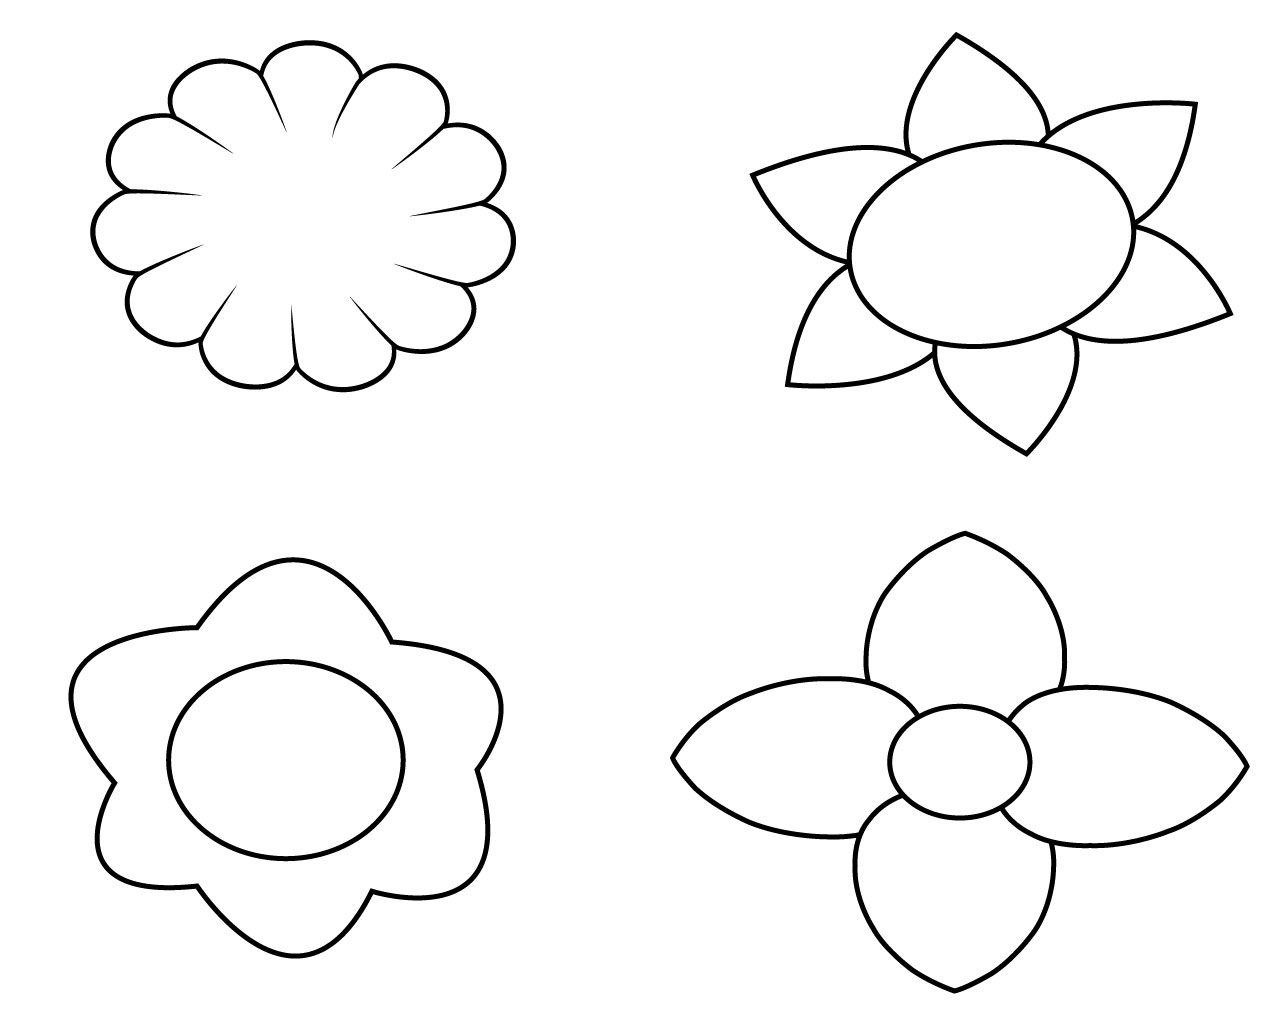 Simple Flower Coloring Pages For Toddlers   CareersPlay.com